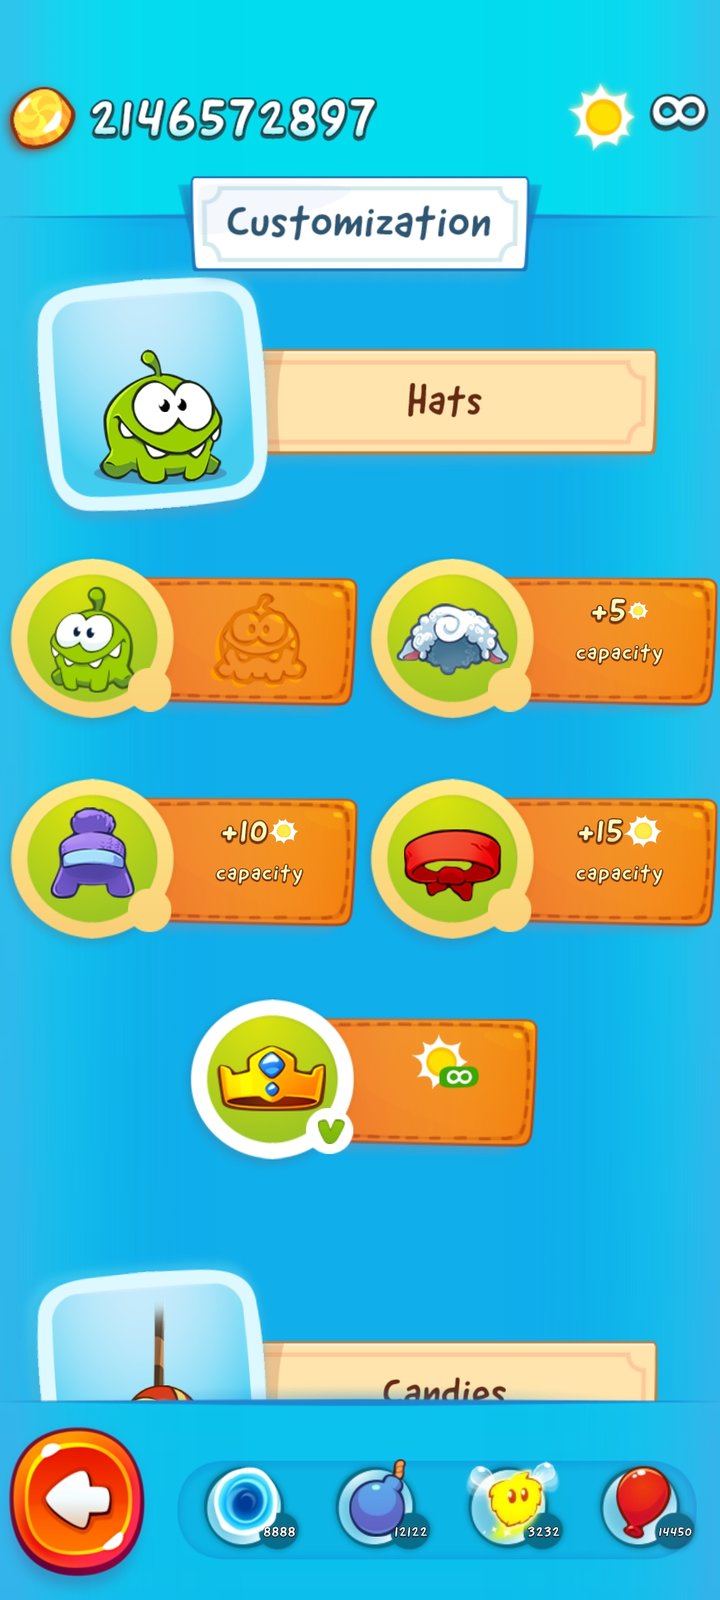 Cut the Rope 2 v1.39.0 MOD APK -  - Android & iOS MODs,  Mobile Games & Apps